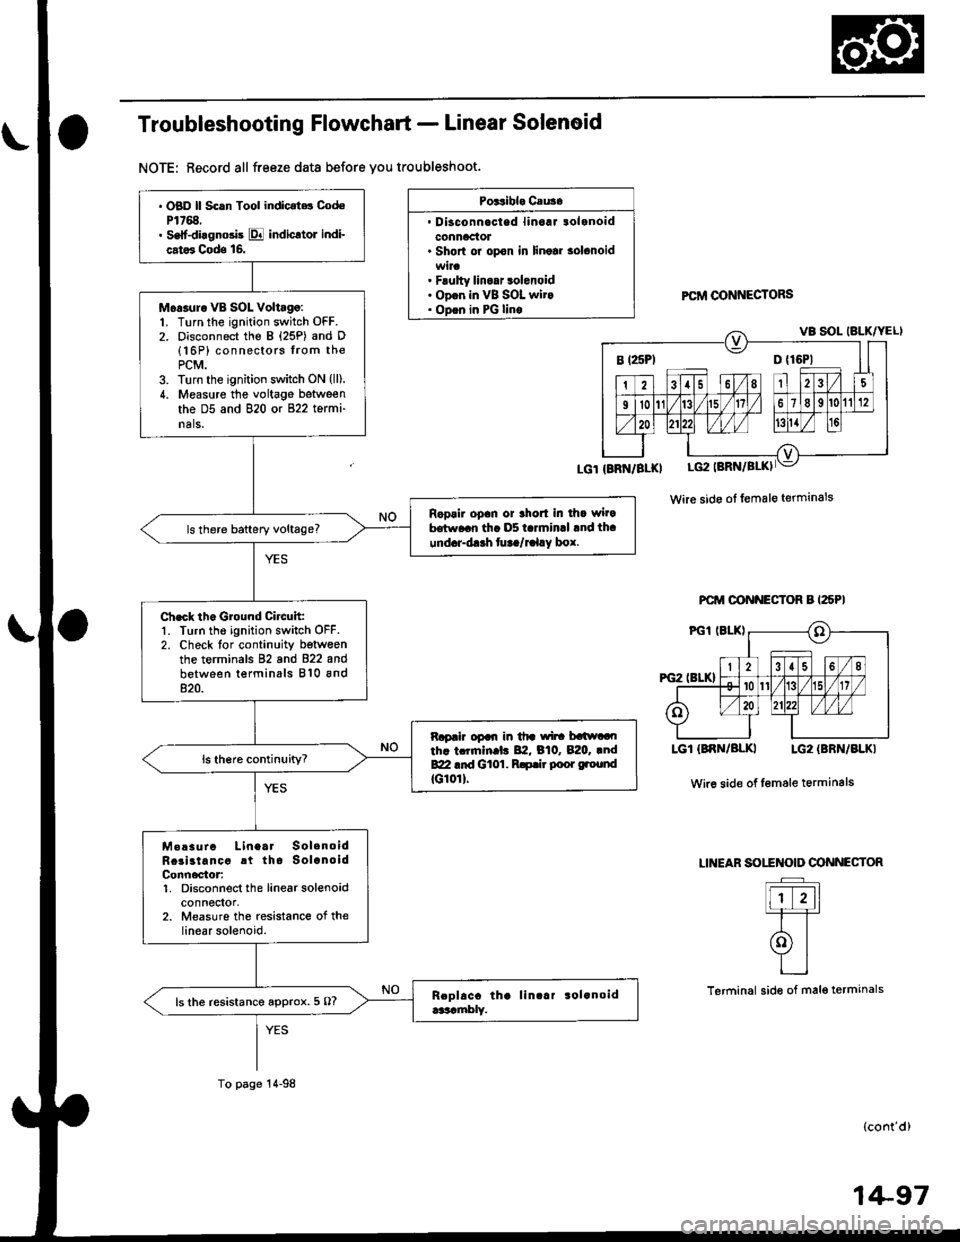 HONDA CIVIC 1997 6.G Workshop Manual Troubleshooting Flowchart - Linear Solenoid
NOTE: Record all freeze data before you troubleshoot.
Poitibl. Cau3.
. Disconnacted linoaJ tolanoidconnaclol. Shorl or opon in linolr solonoid
. Flulty lino